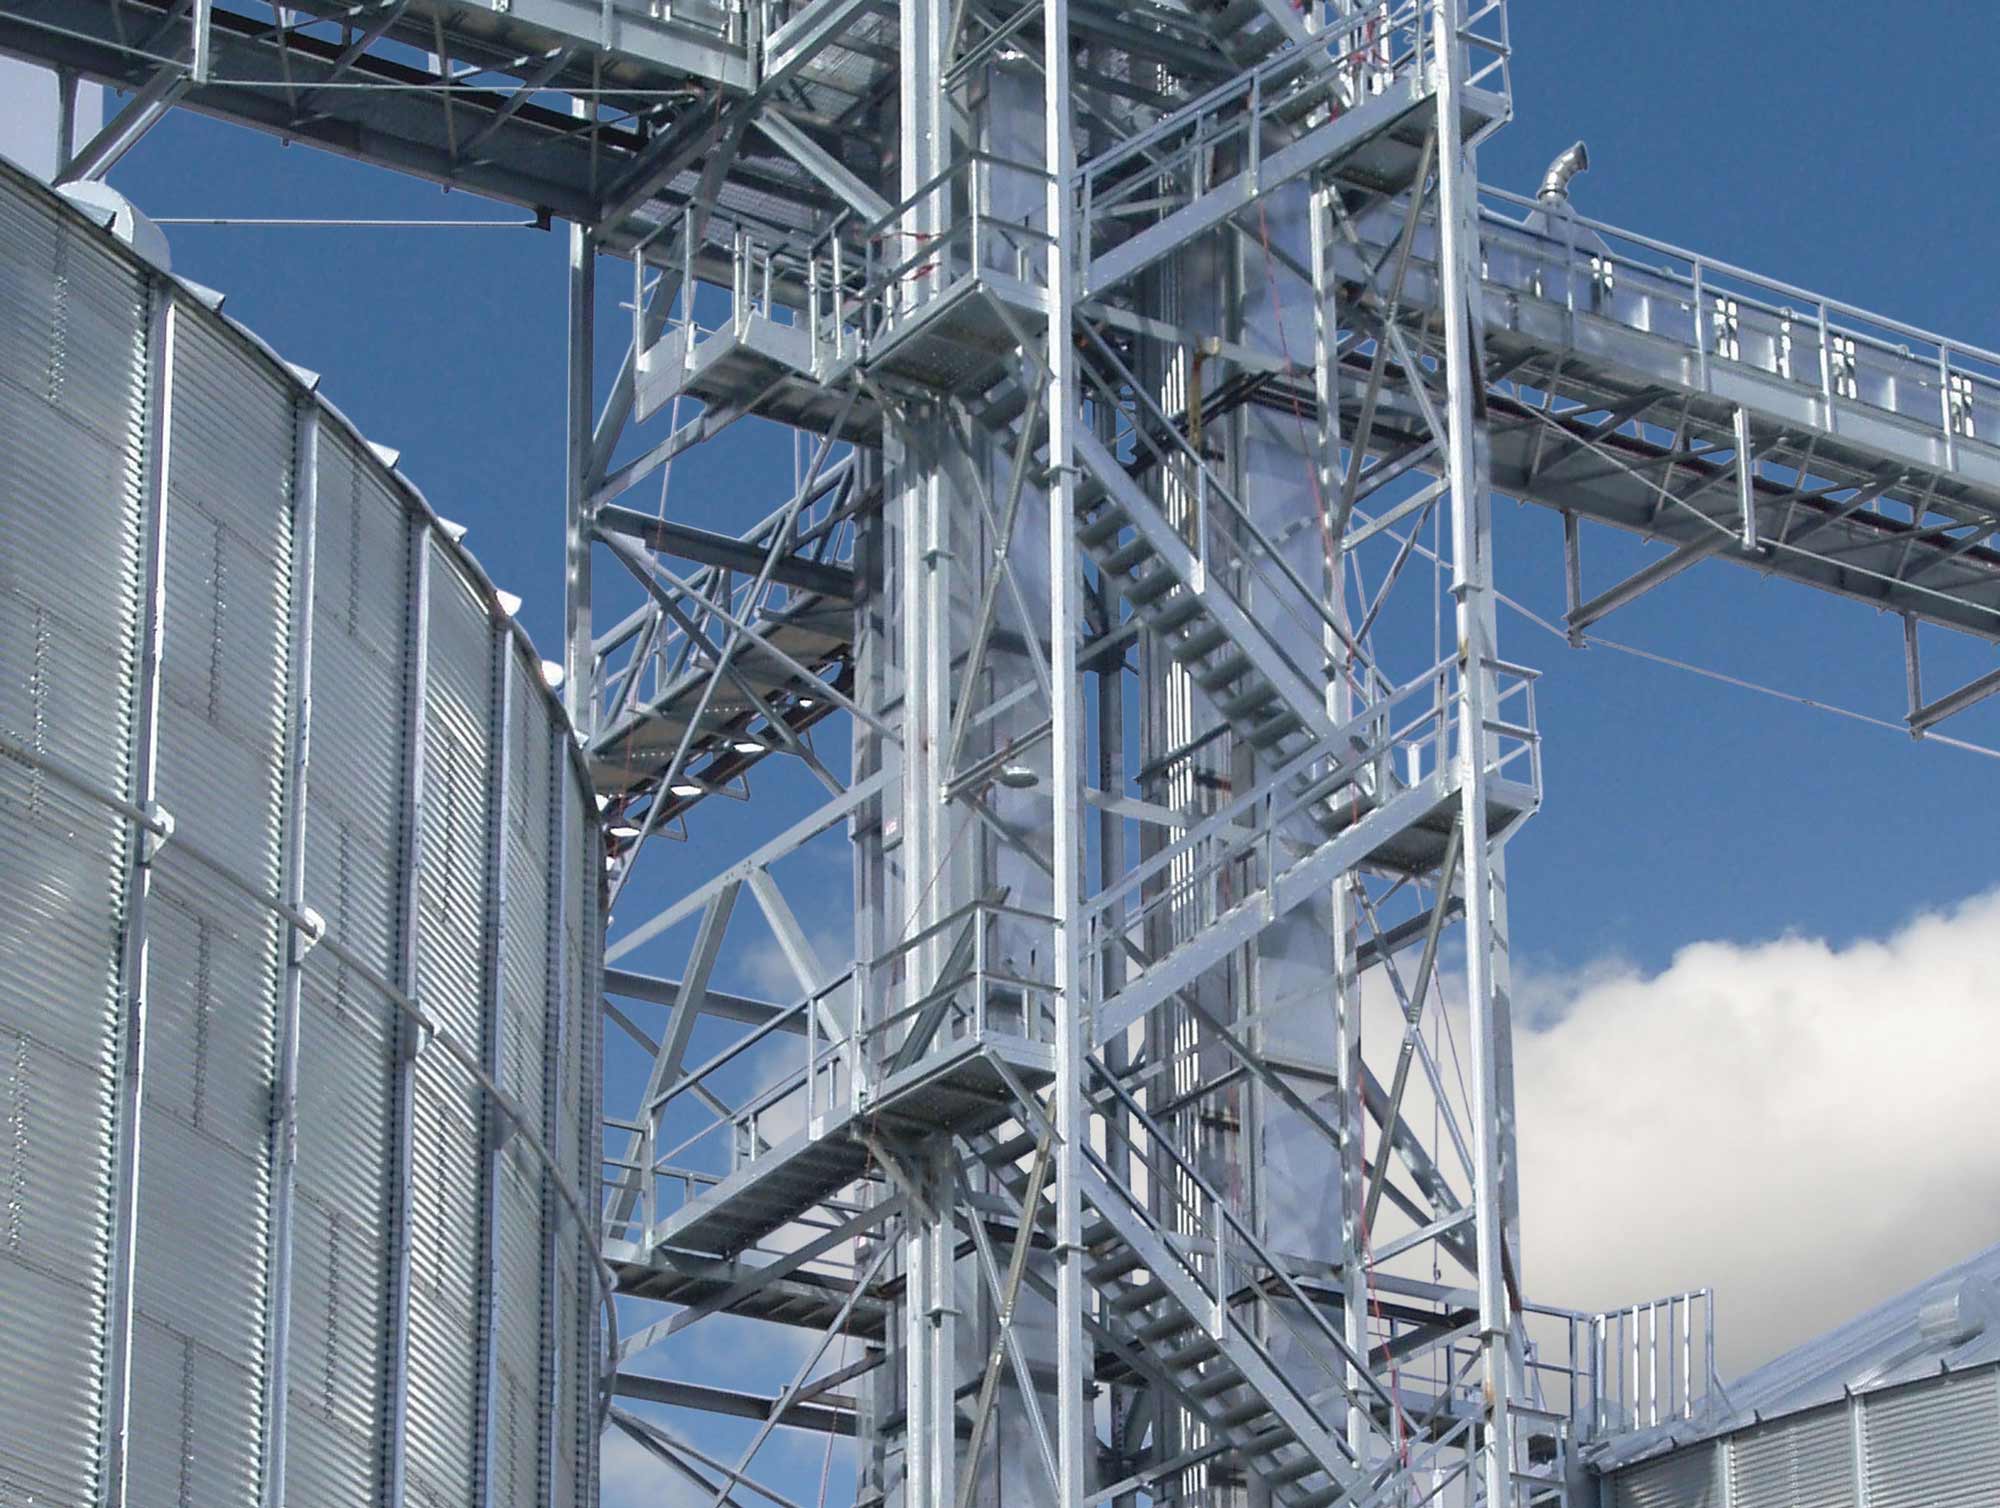 view of SCAFCO tower and catwalk next to a grain bin